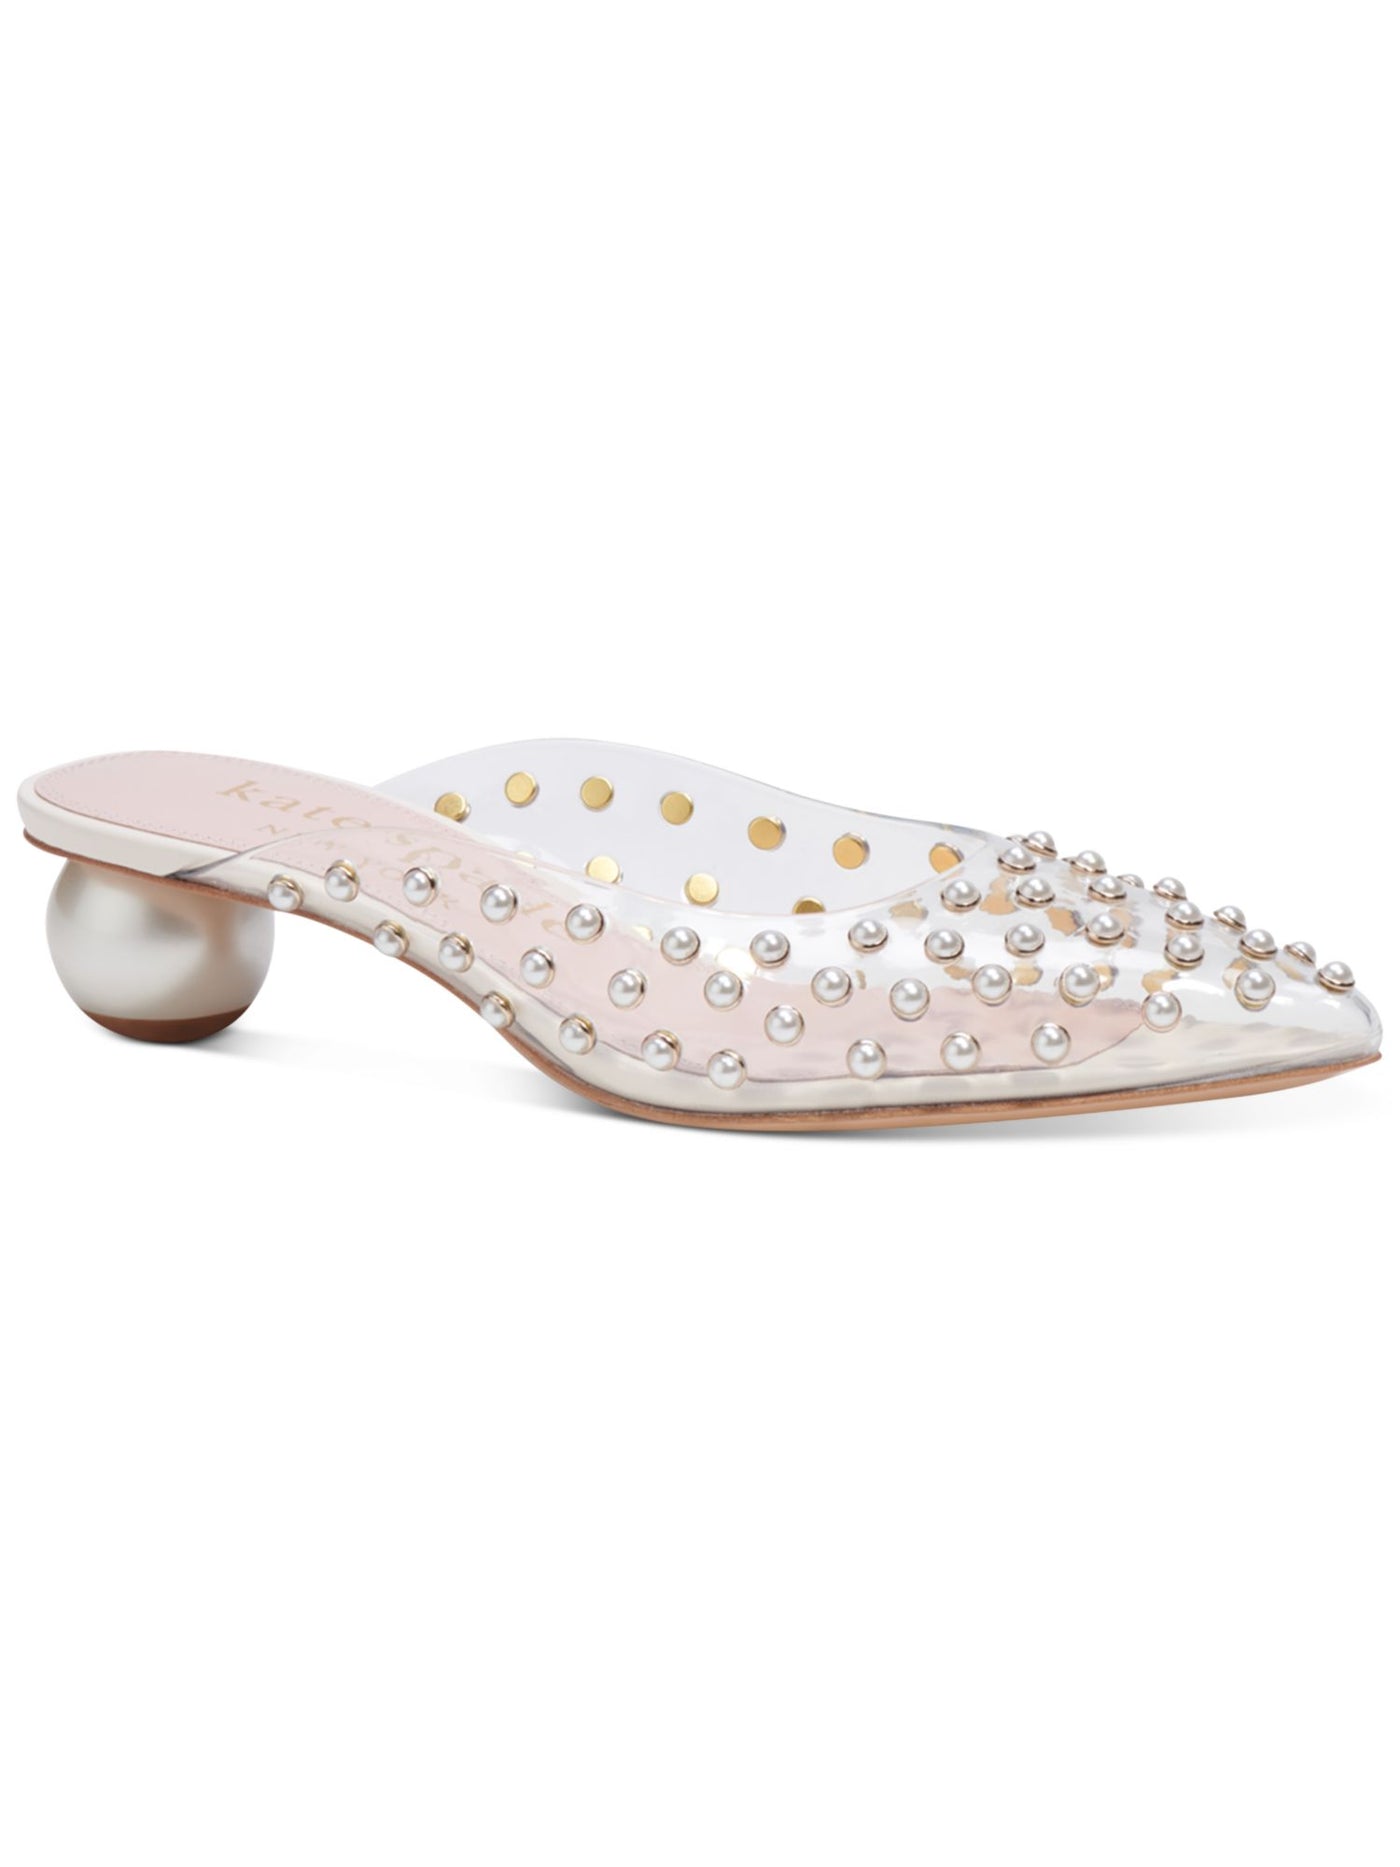 KATE SPADE NEW YORK Womens Clear Embellished Padded Honor Pointed Toe Slip On Flats Shoes 7 B